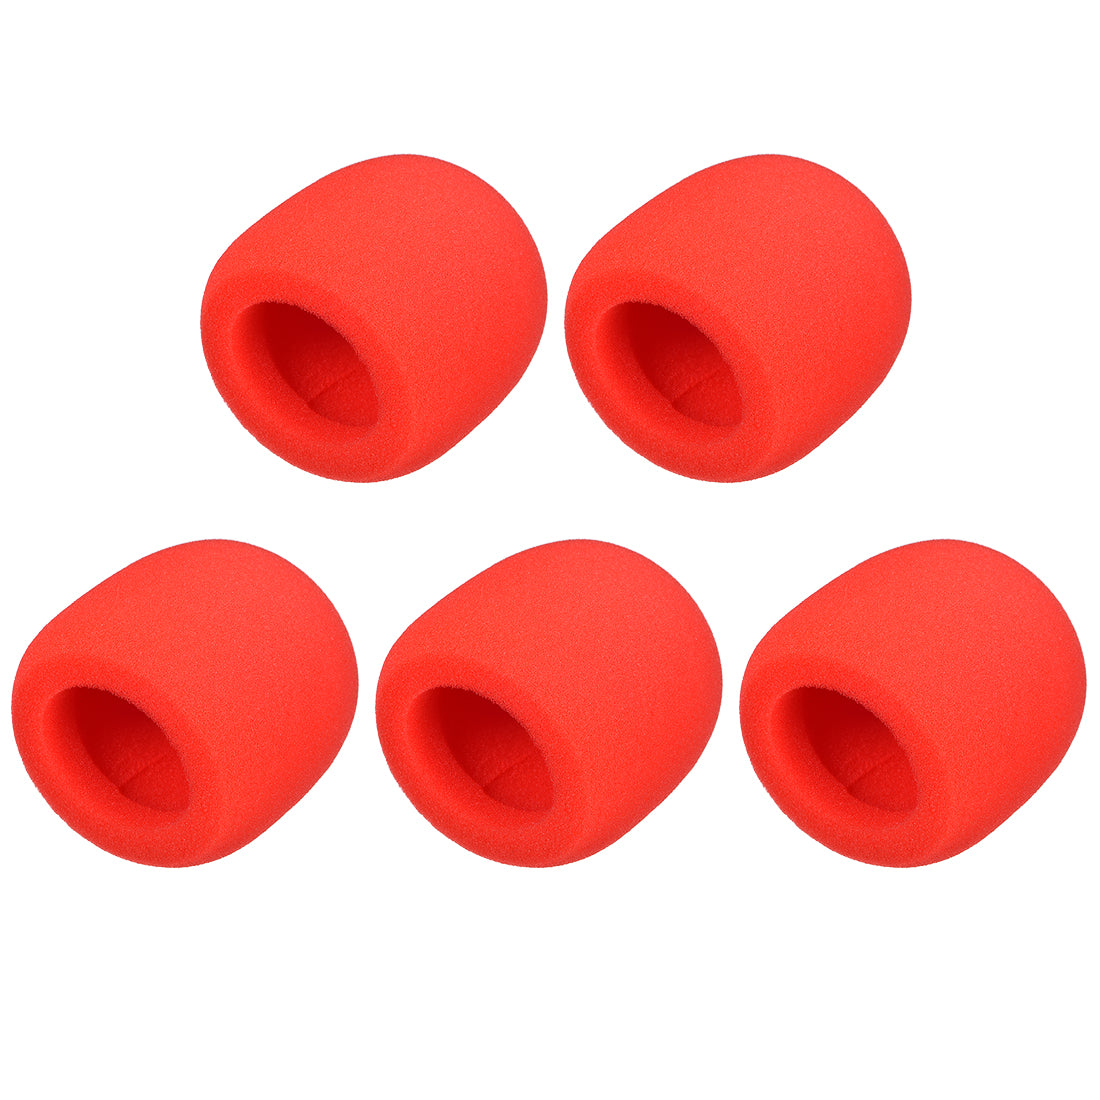 uxcell Uxcell 5PCS Thicken Sponge Foam Mic Cover Handheld Microphone Windscreen Red for KTV